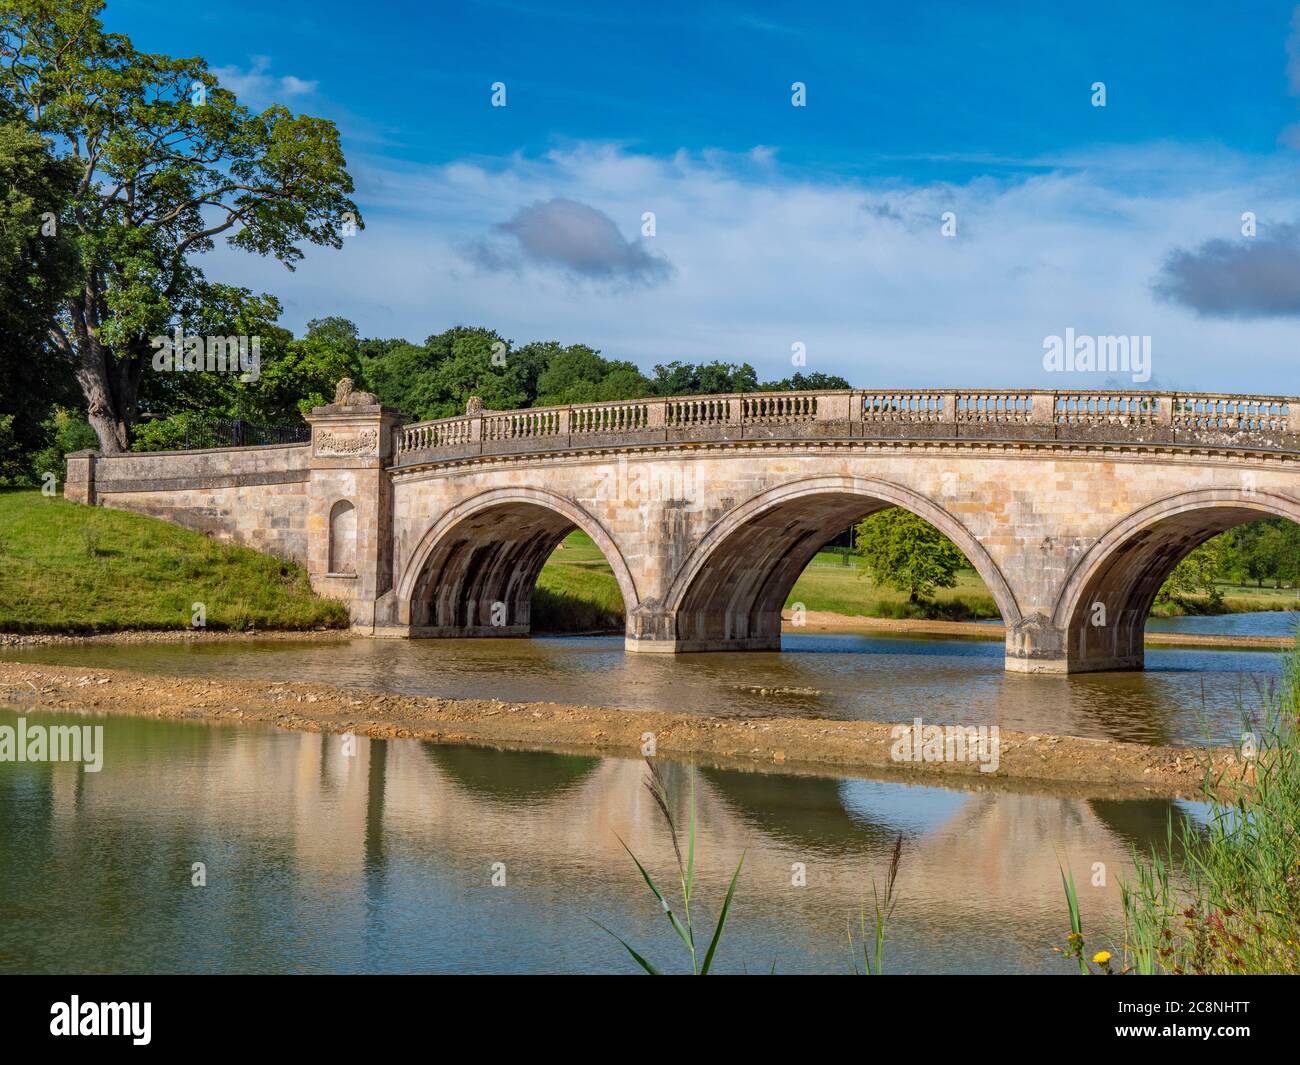 Lion Bridge - an 18th century, stone built crossing over the still lake on the Burghley House estate. Stamford, Lincolnshire, England, UK. Stock Photo